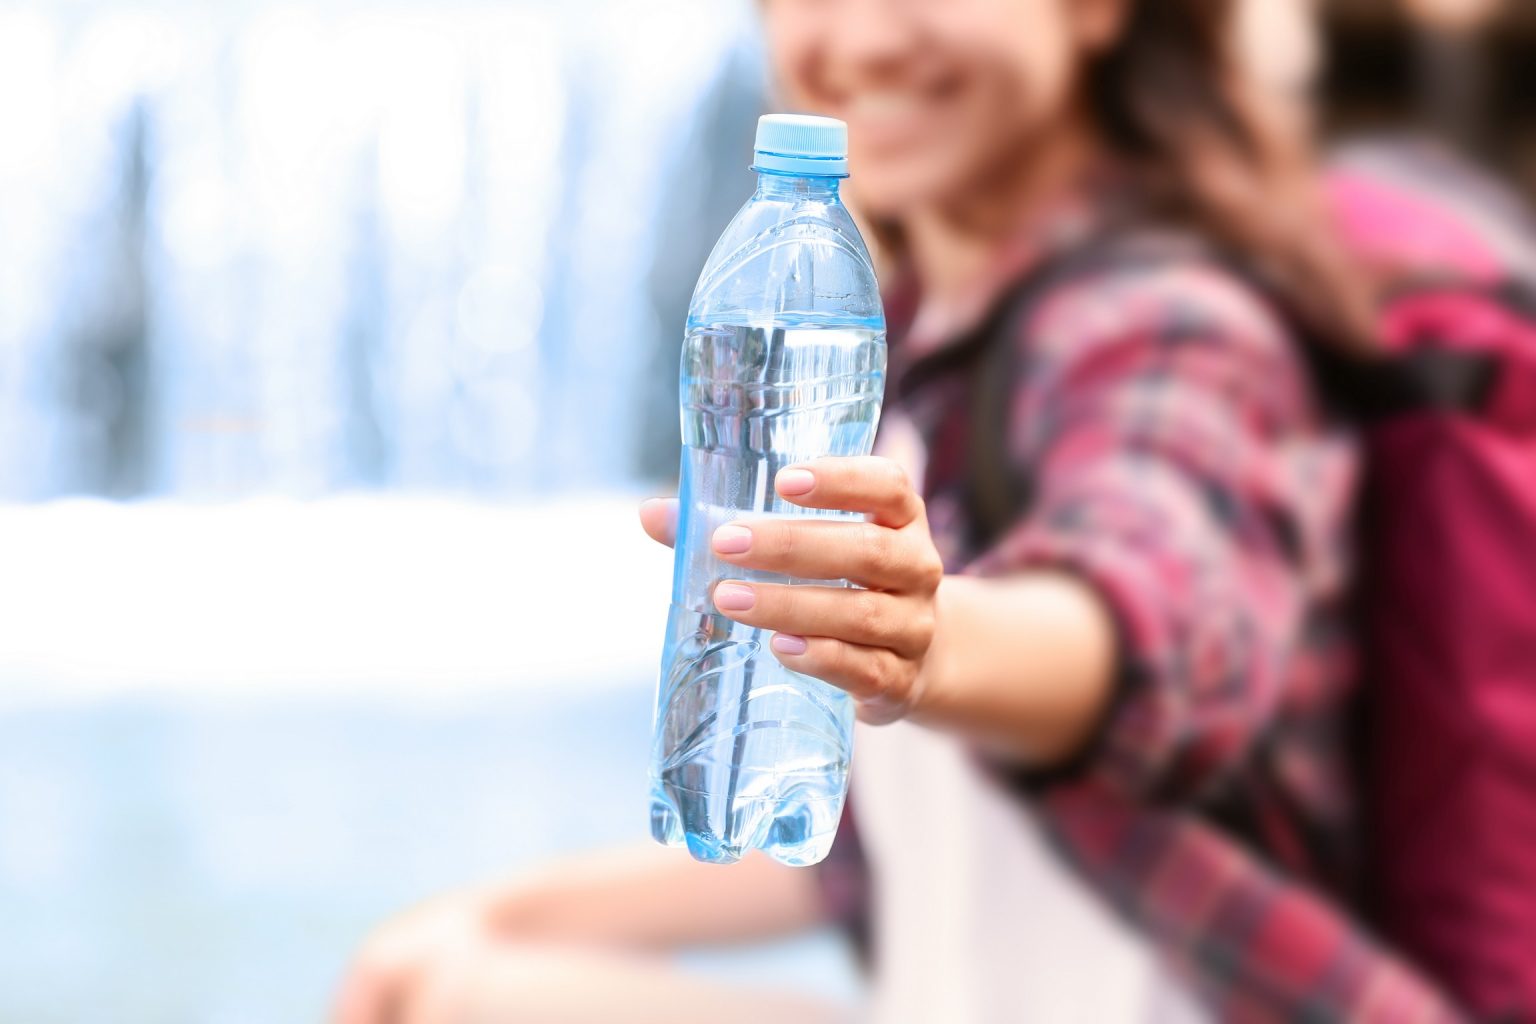 Bottled Water in Greenville, Spartanburg, and Anderson, South Carolina